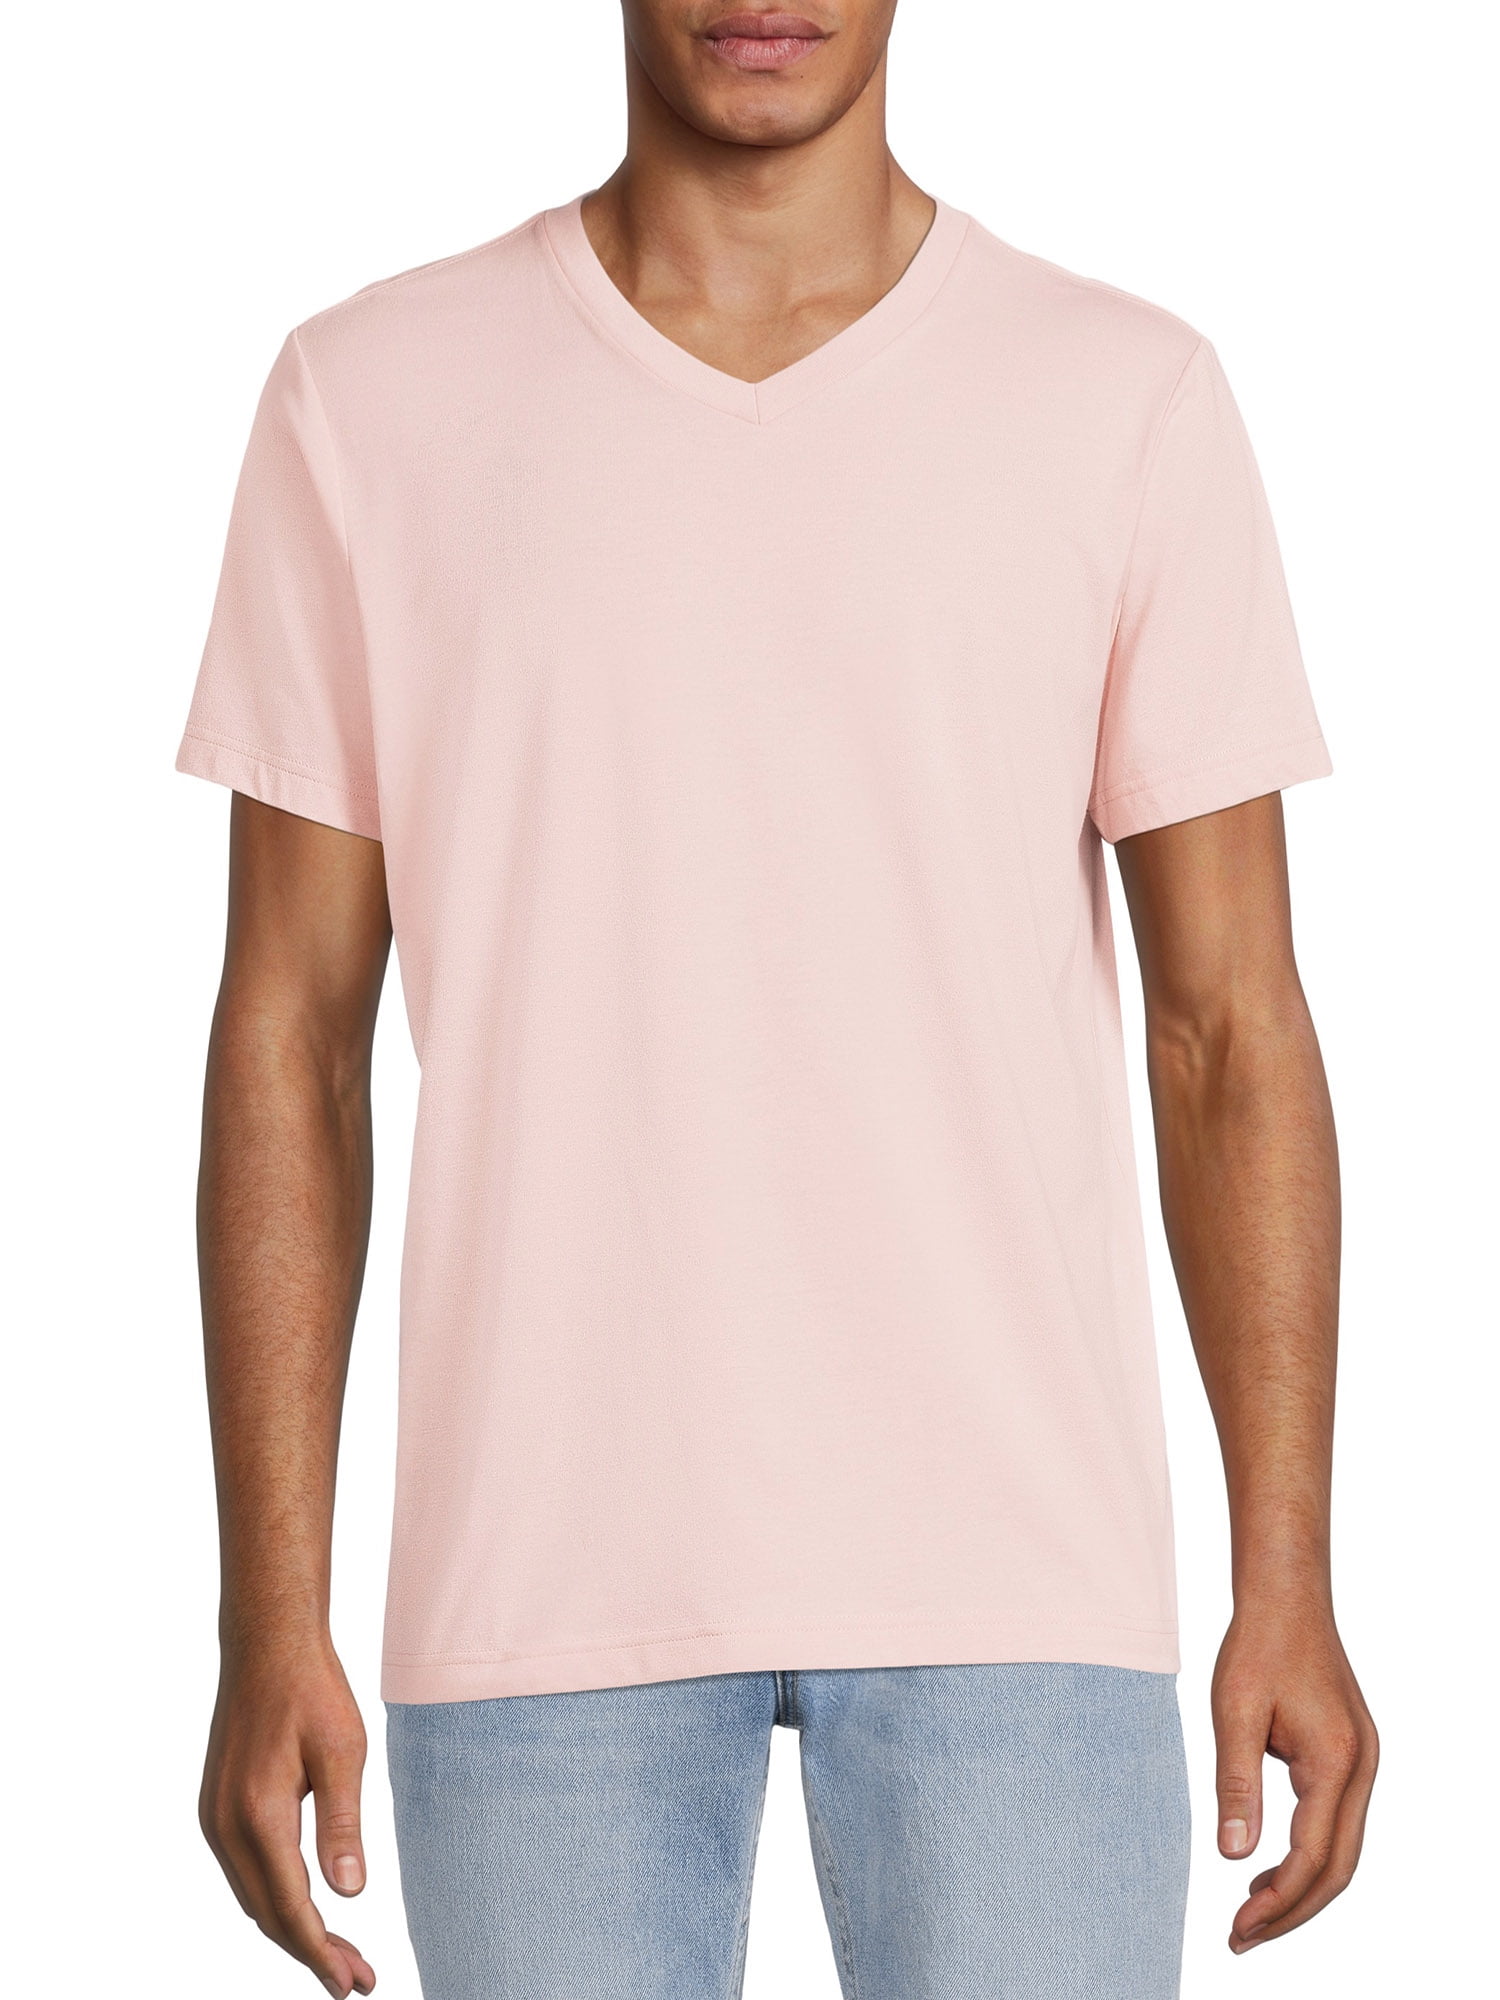 JustBlanks Young Men's Short Sleeve The Concert Tee 4.5-ounce, 100% Soft  Spun Cotton Jersey Keep The Beat in Harmony in This V-Neck T-Shirt for Men  - Neon Pink - X-Small 